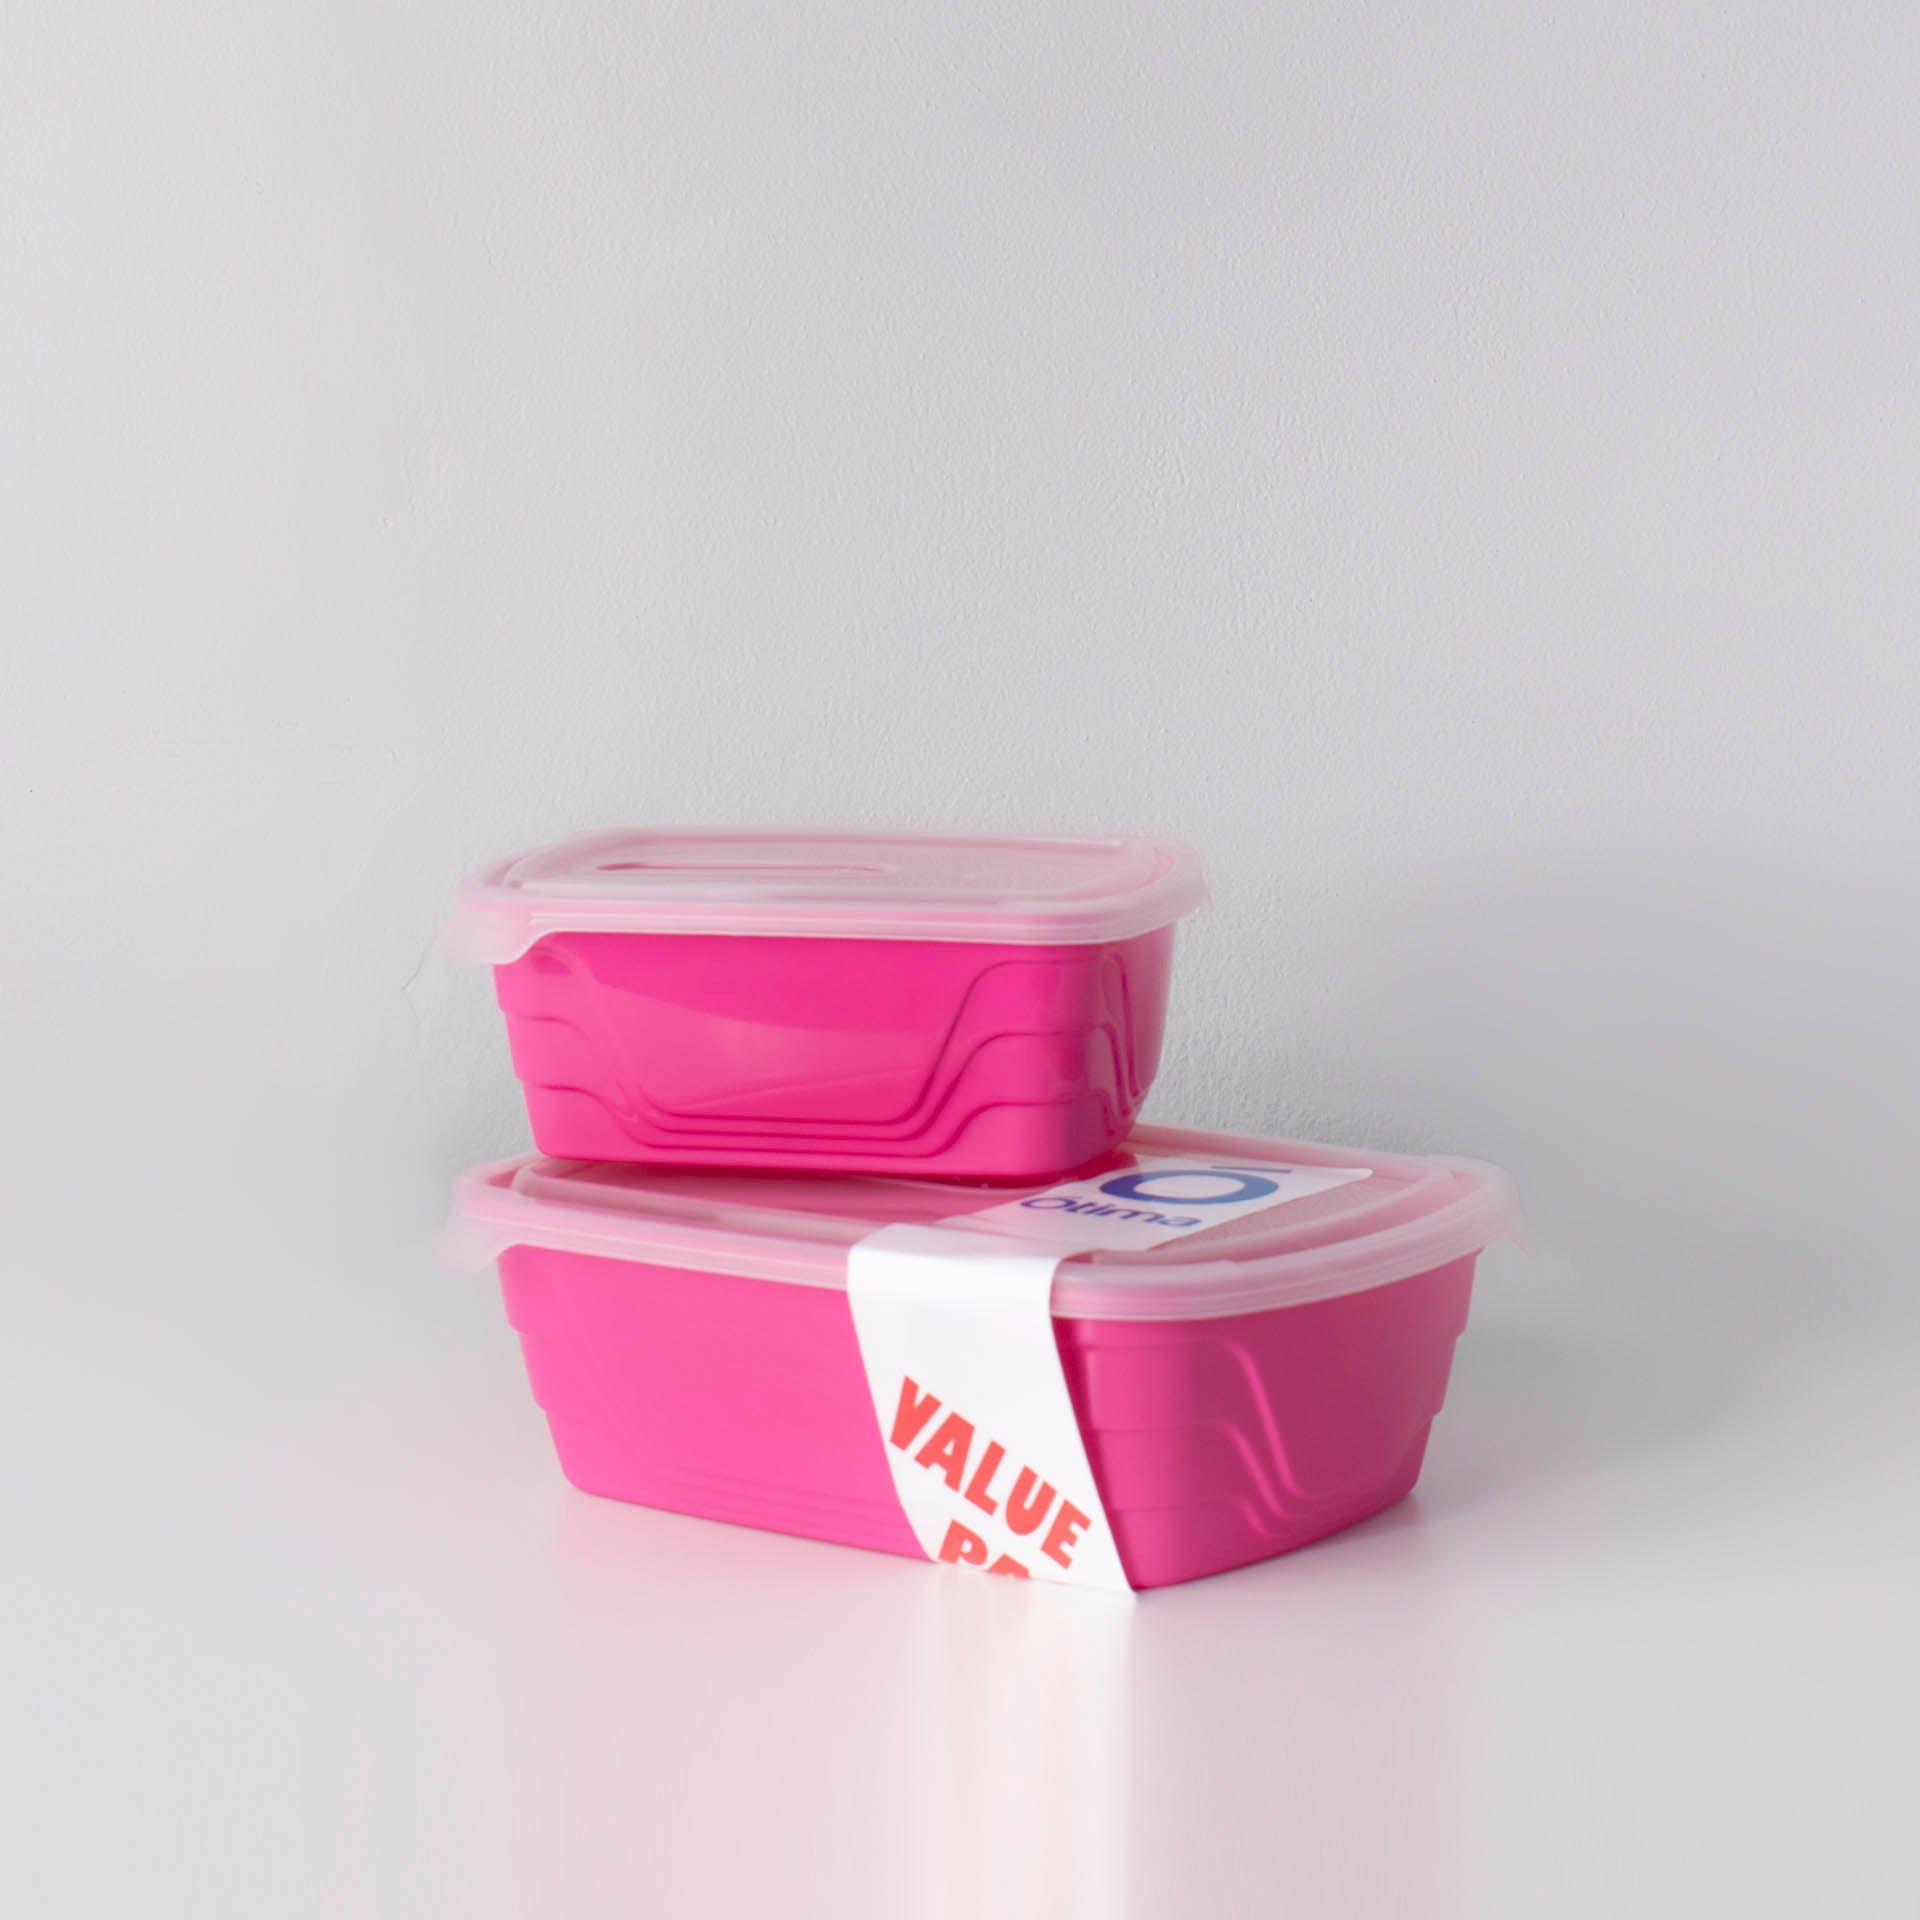 Otima Snap It Value Pack Lunch Box Containers 4Pack